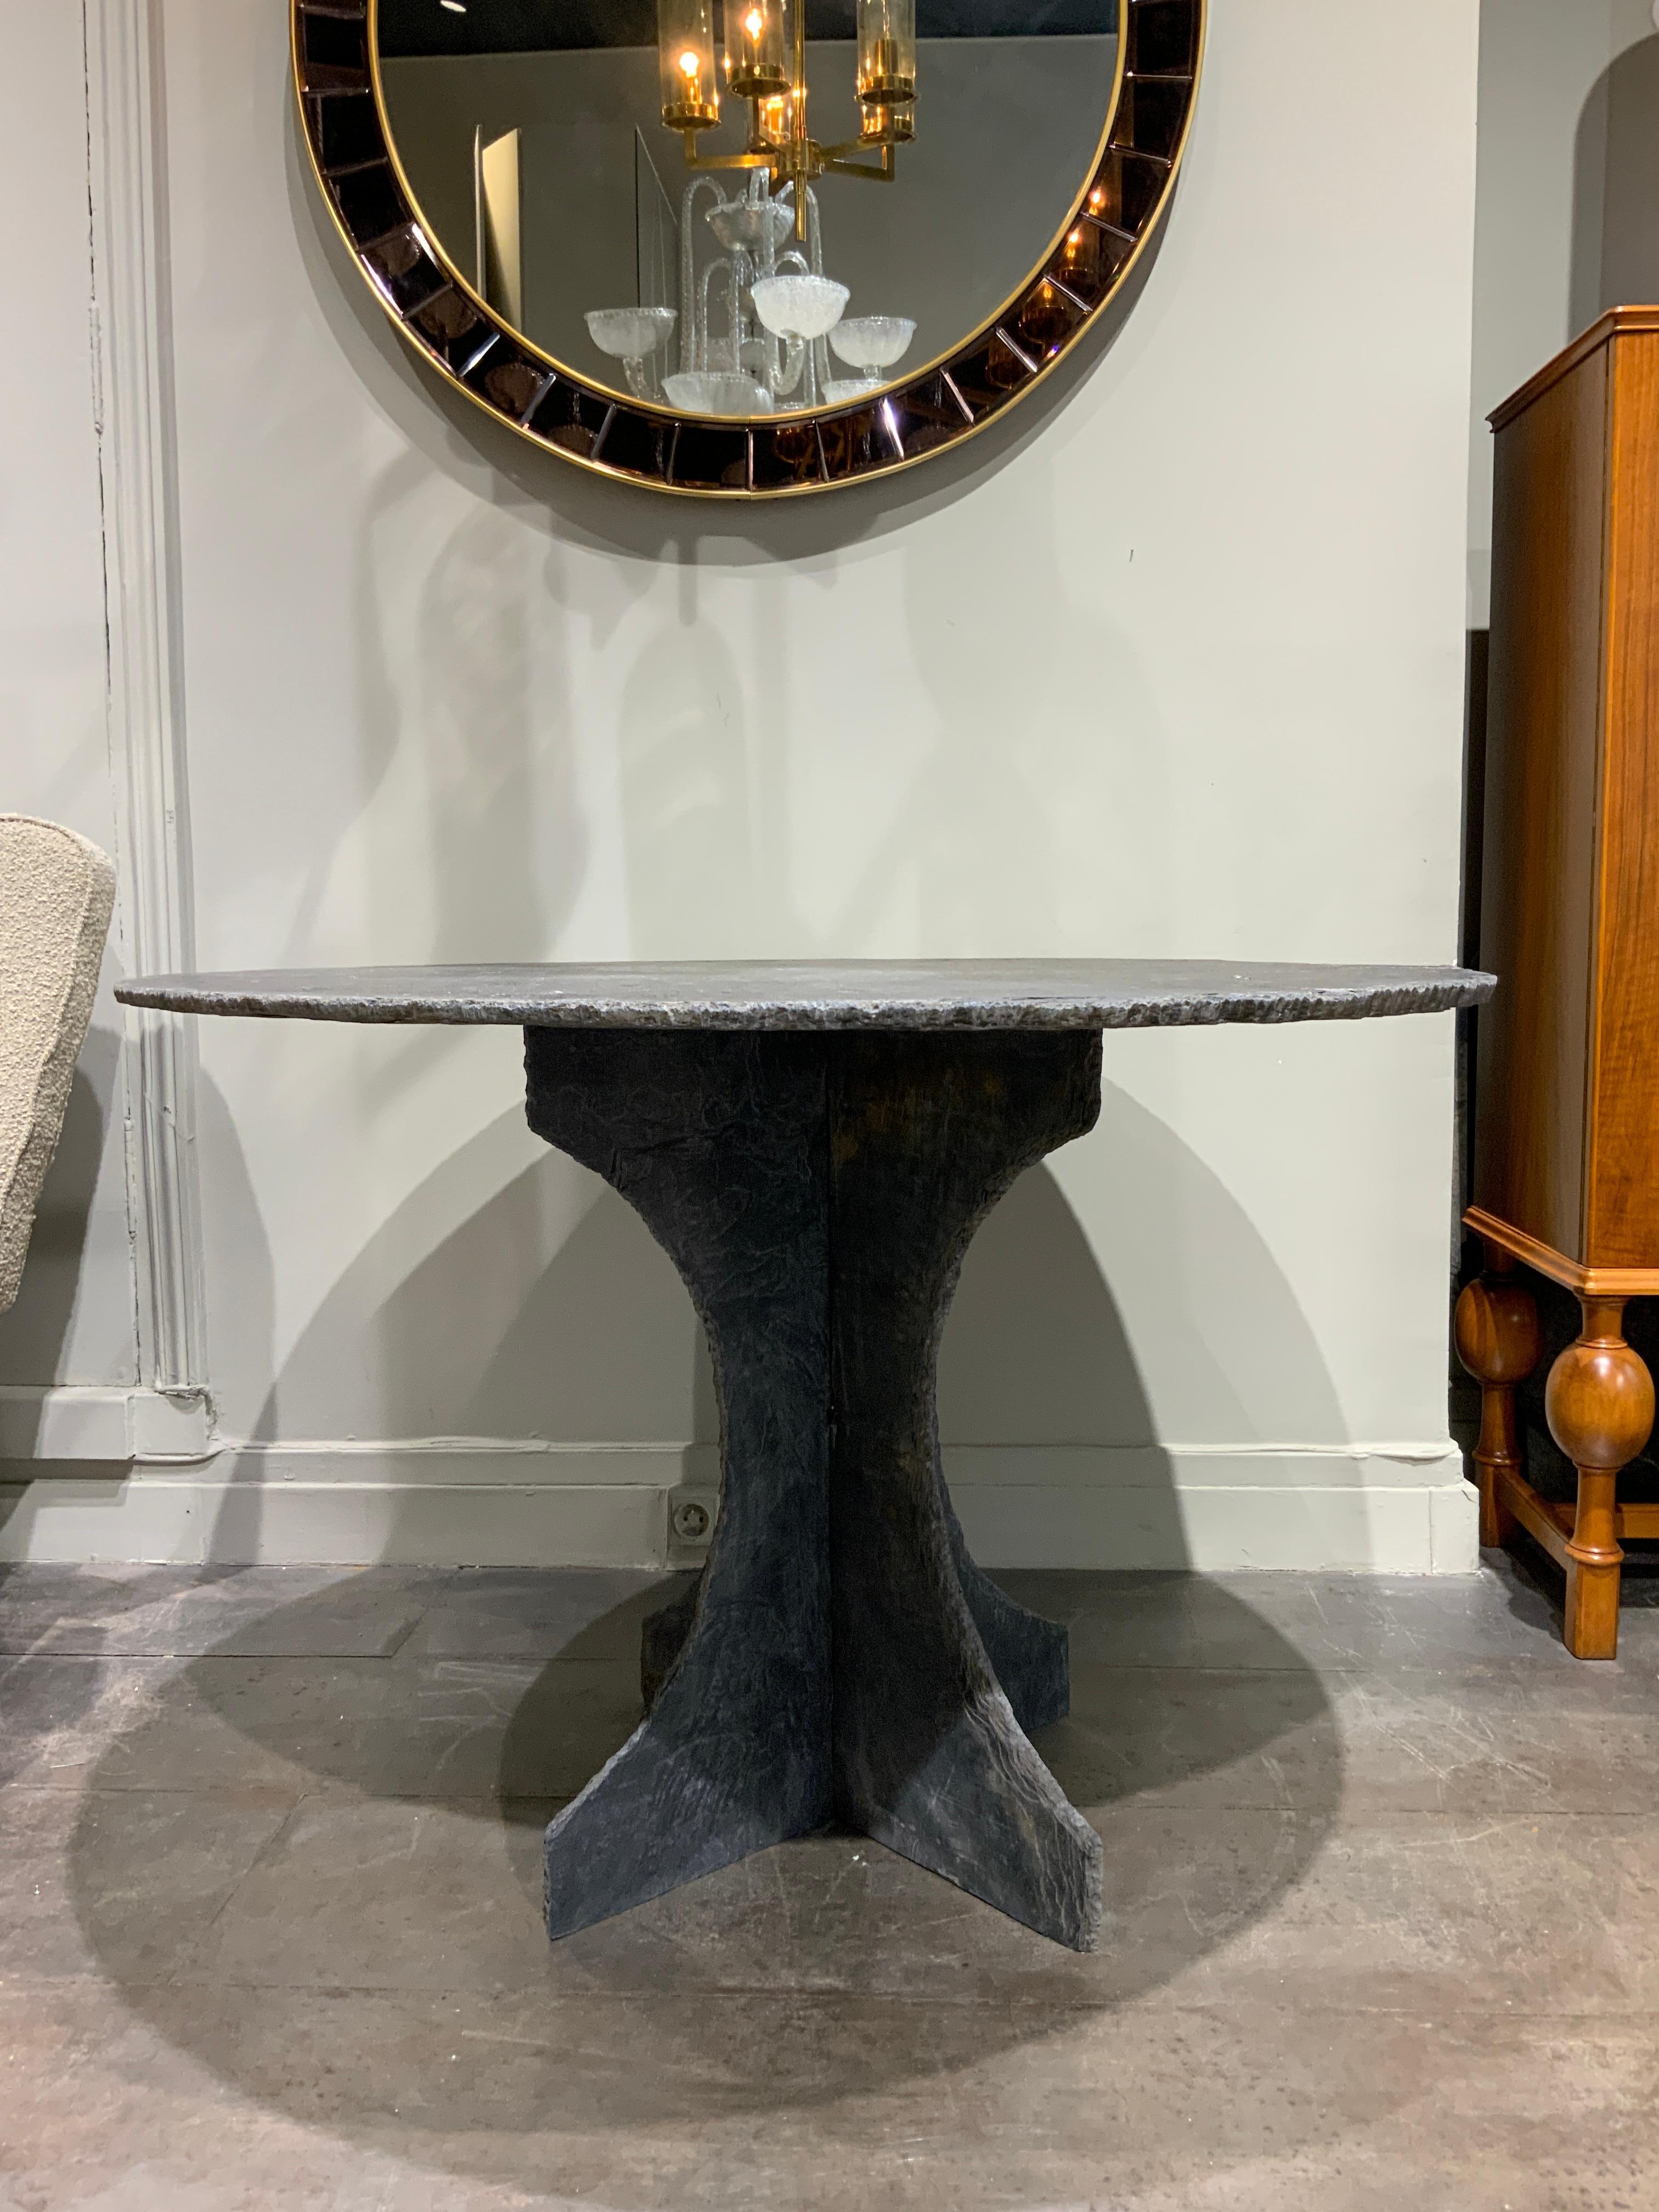 Elegant hand carved French slate table in 3 parts circa 1950 from Trelaze (49)
Nice size ( diameter 110 cm) could be a nice center or dining table !